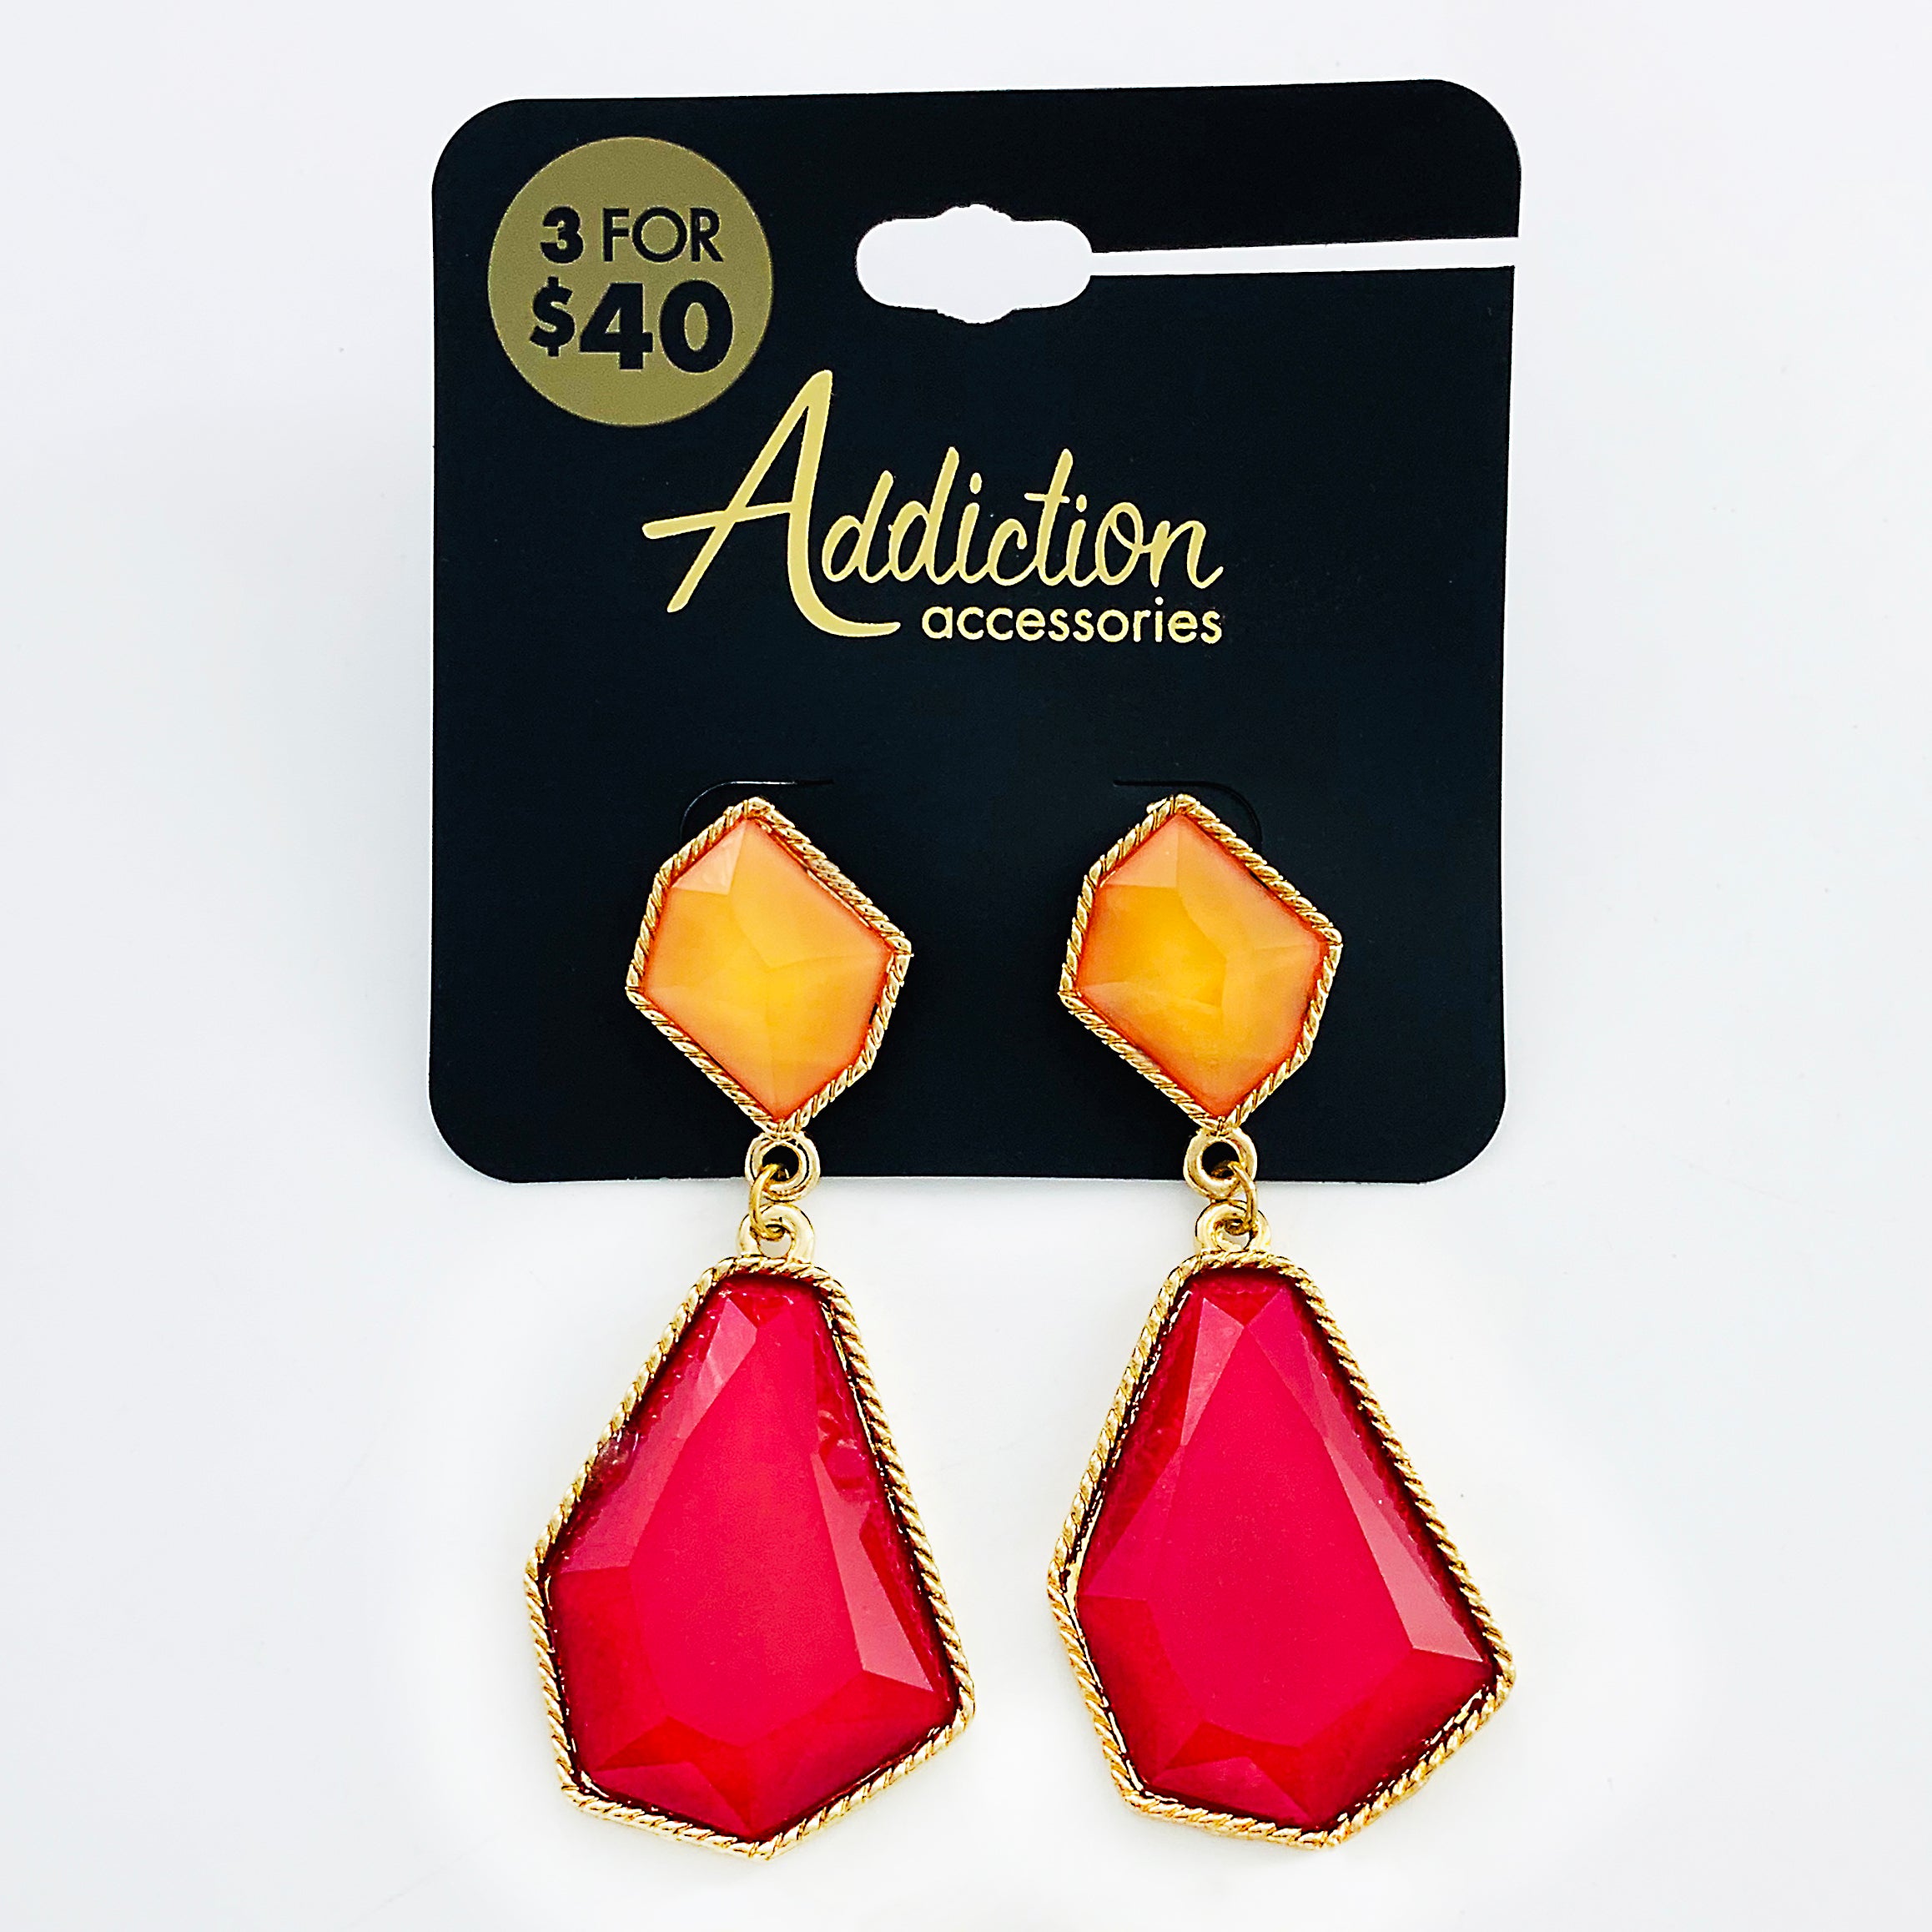 Earrings with orange and red facet stones